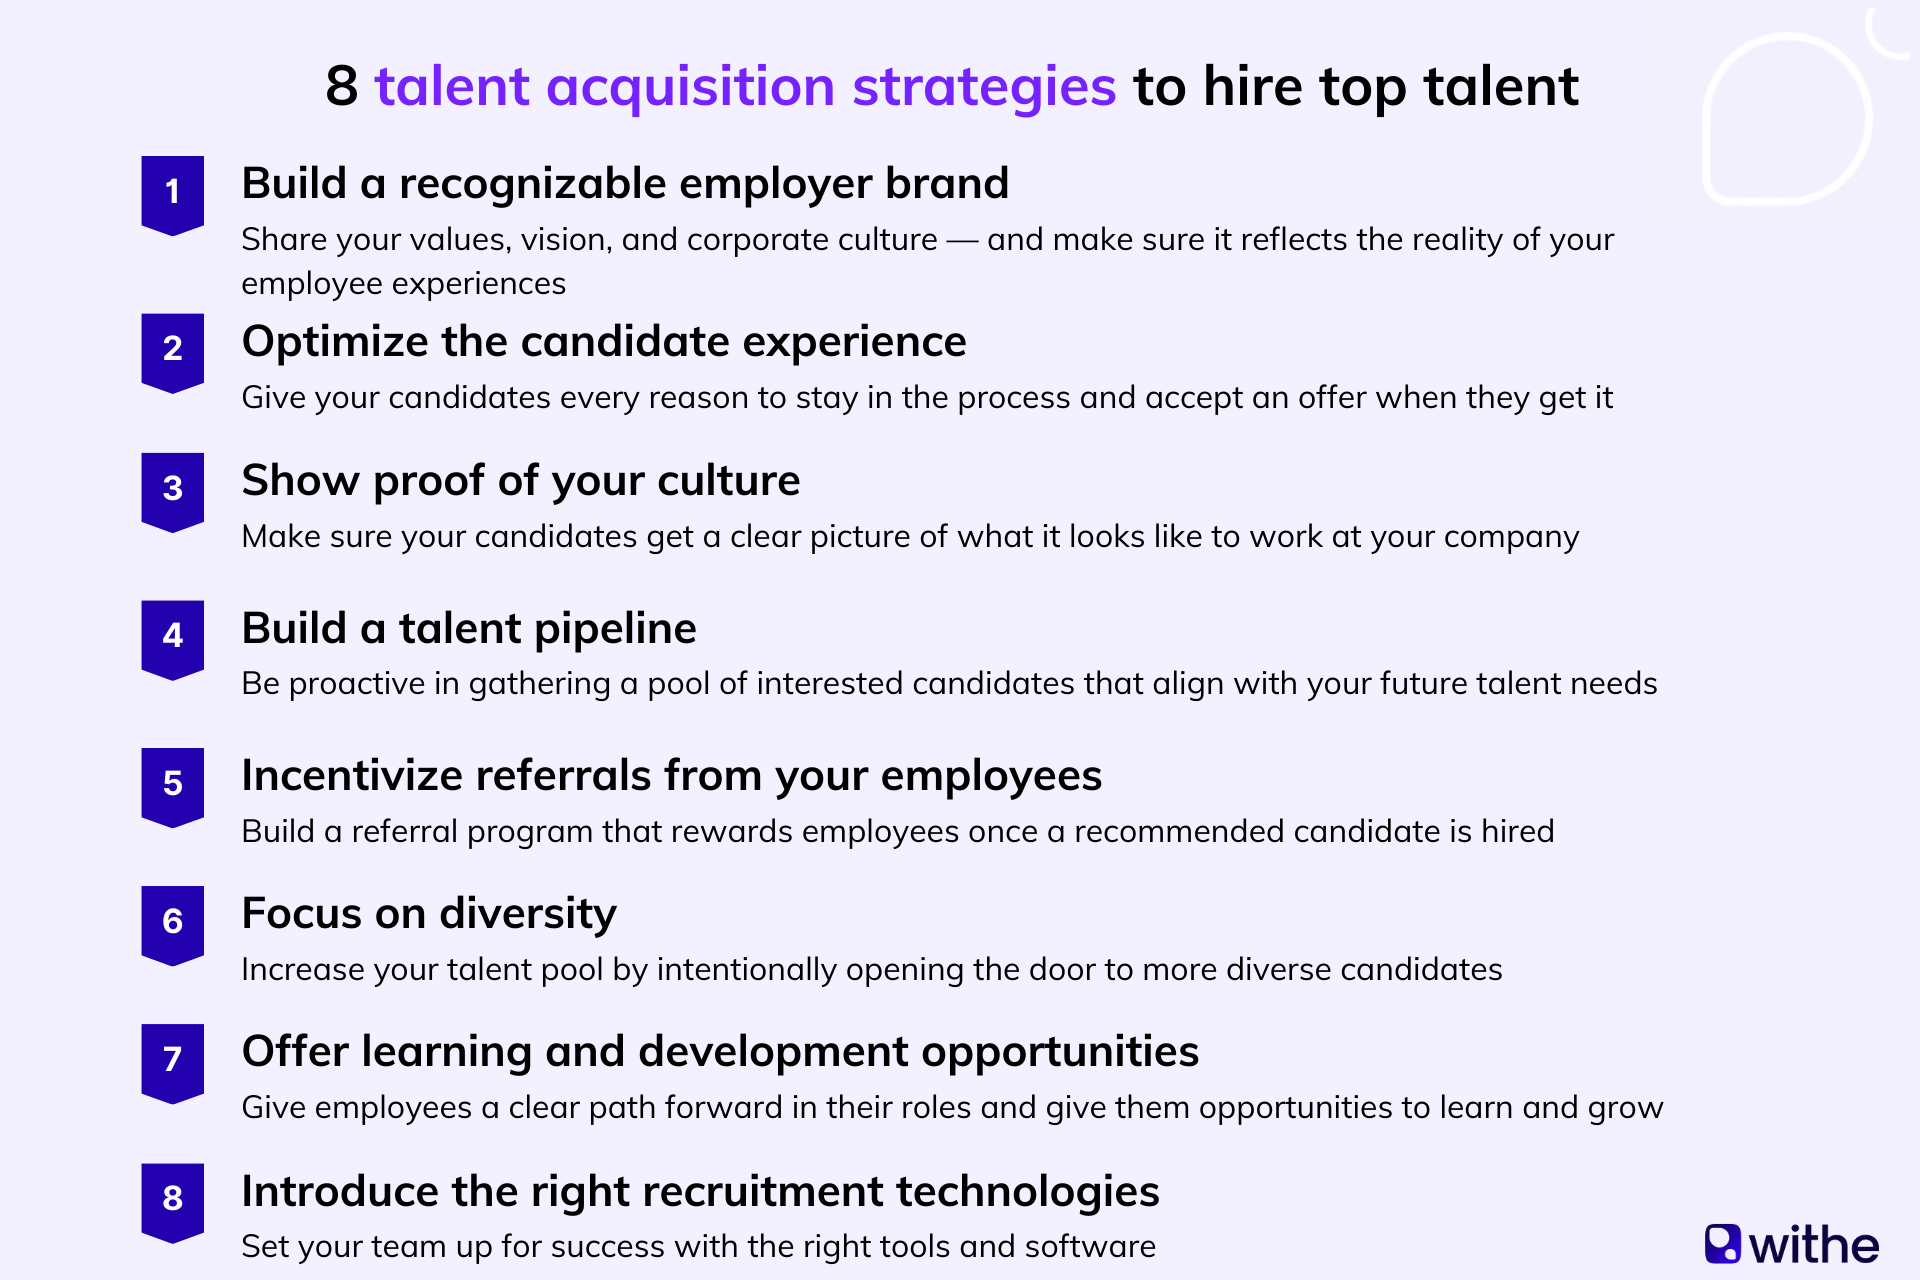 8 talent acquisition strategies to hire top talent